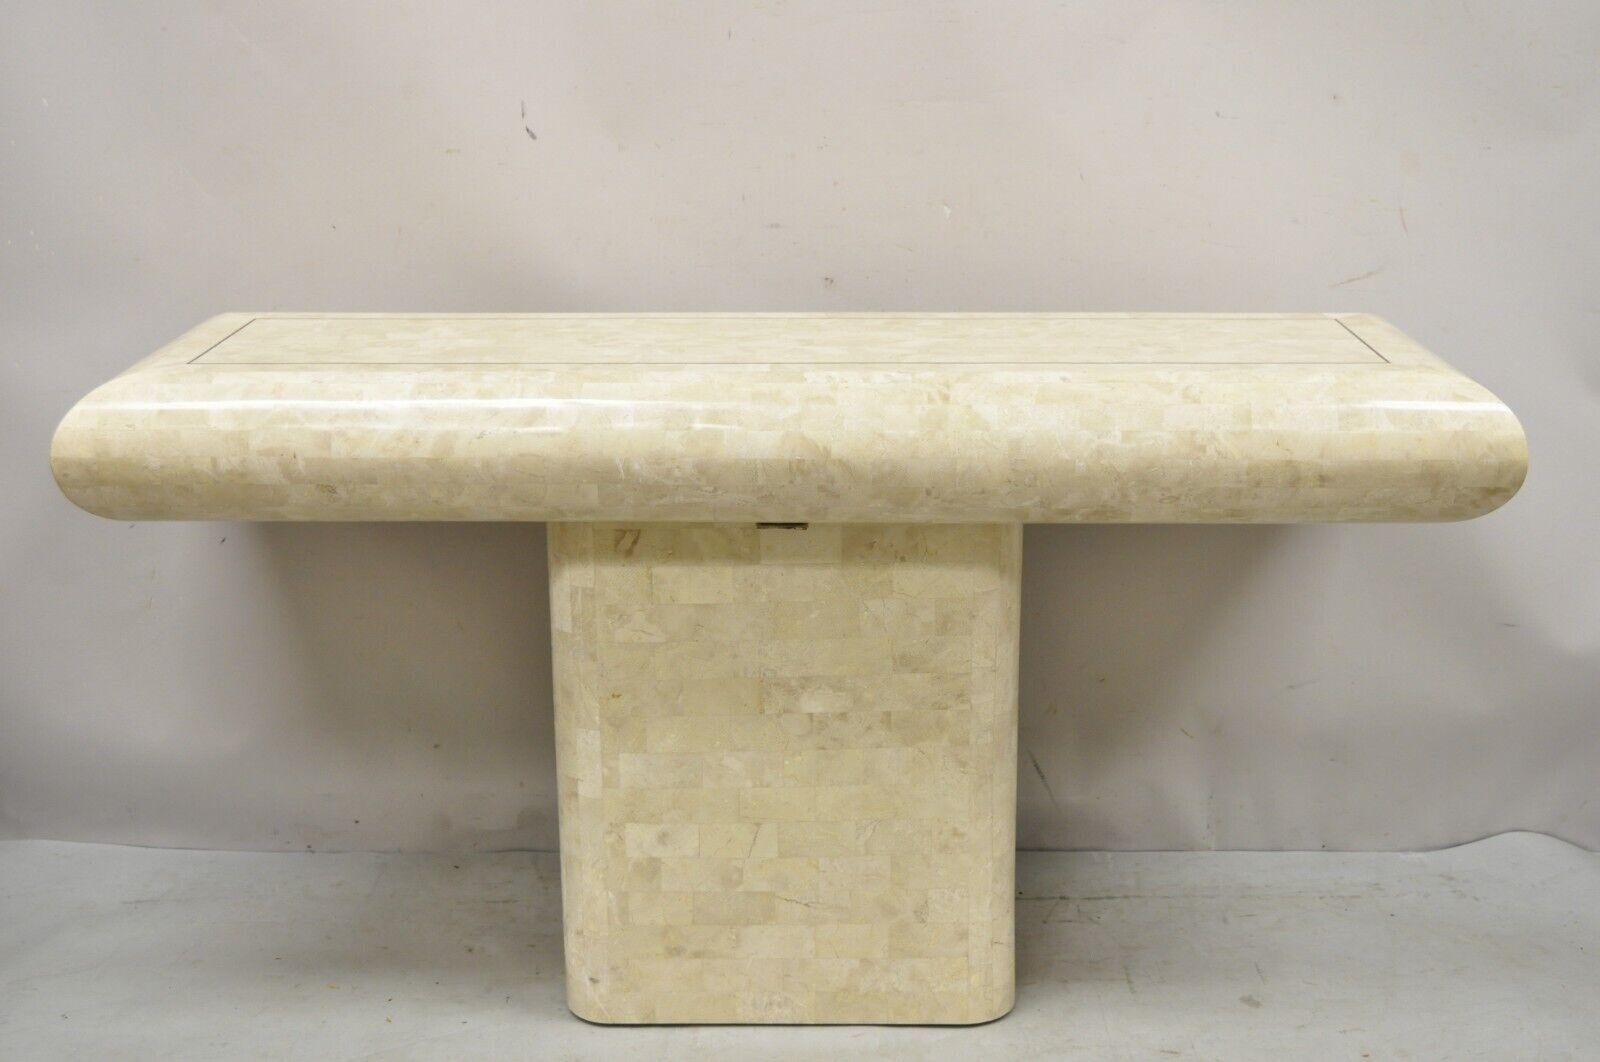 Vintage Maitland Smith Tessellated Stone Inlay Modern Pedestal Console Hall Table. Item features a brass trim inlay, tessellated stone marquetry inlay, pedestal base, clean modernist lines, great style and form, unmarked. Circa Late 20th Century.